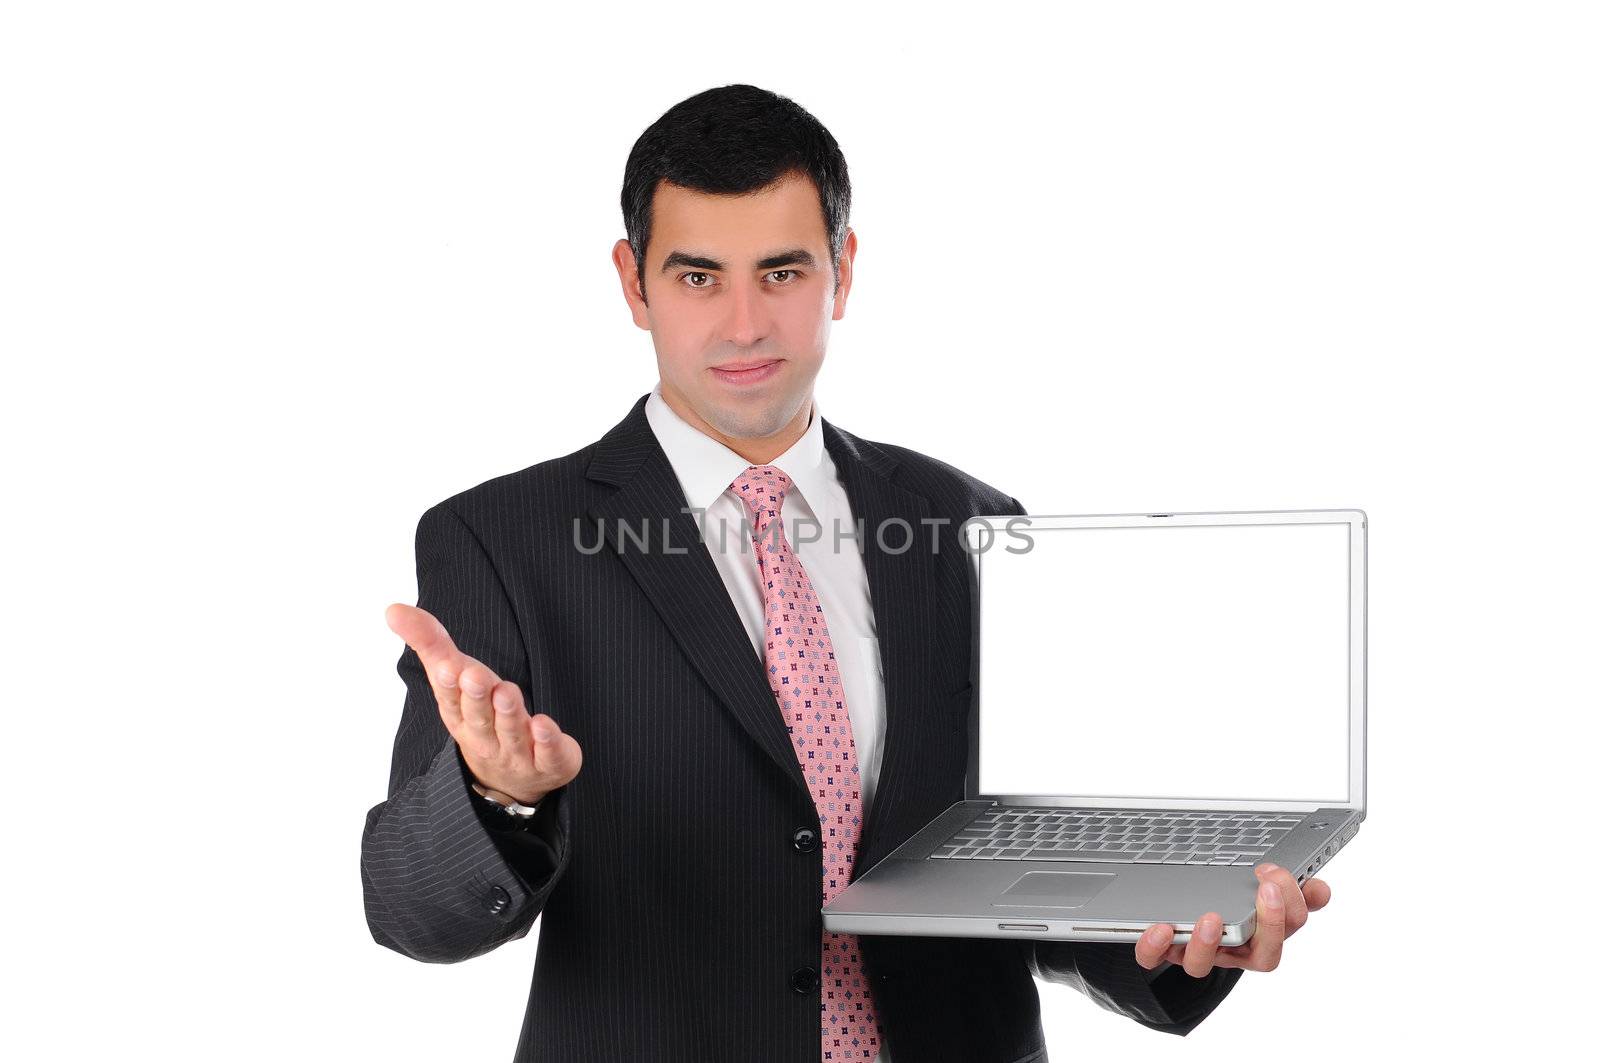 Portrait of a confident young businessman in a dark suit holding laptop and pointing his hand on screen isolated on white by gravityimaging1